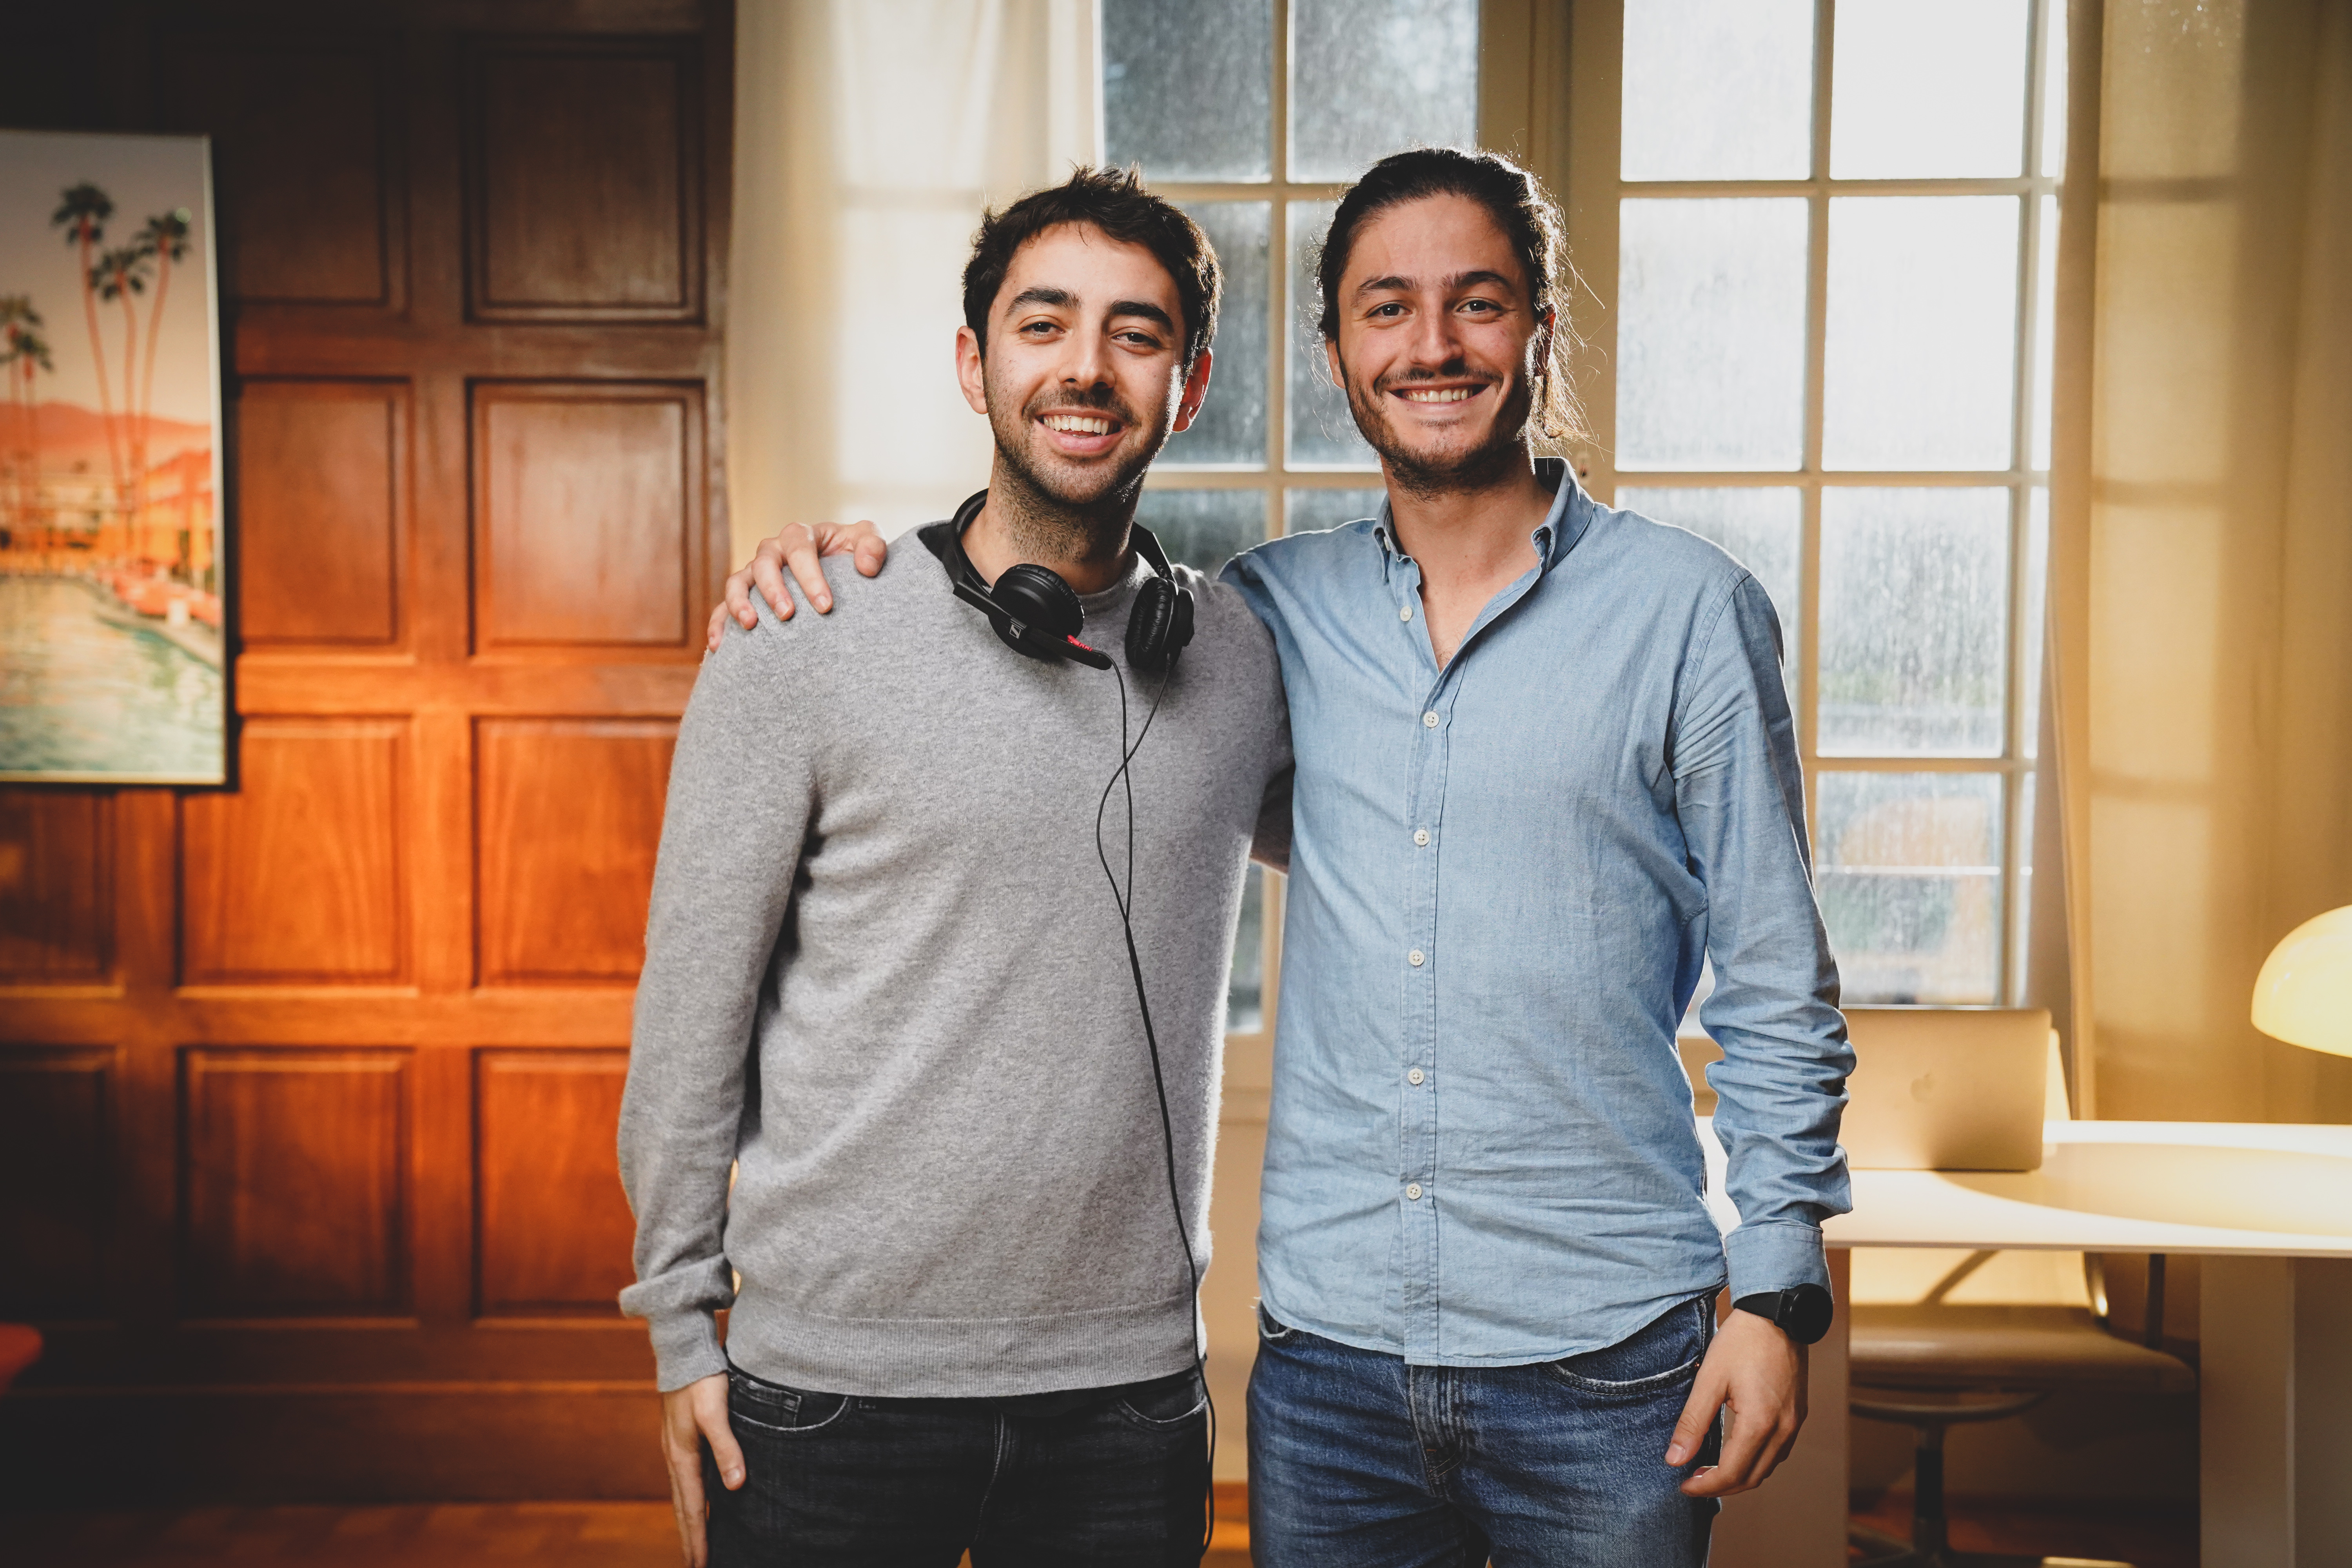 The co-founders of Augment Roy Wellner and Ariel Renous